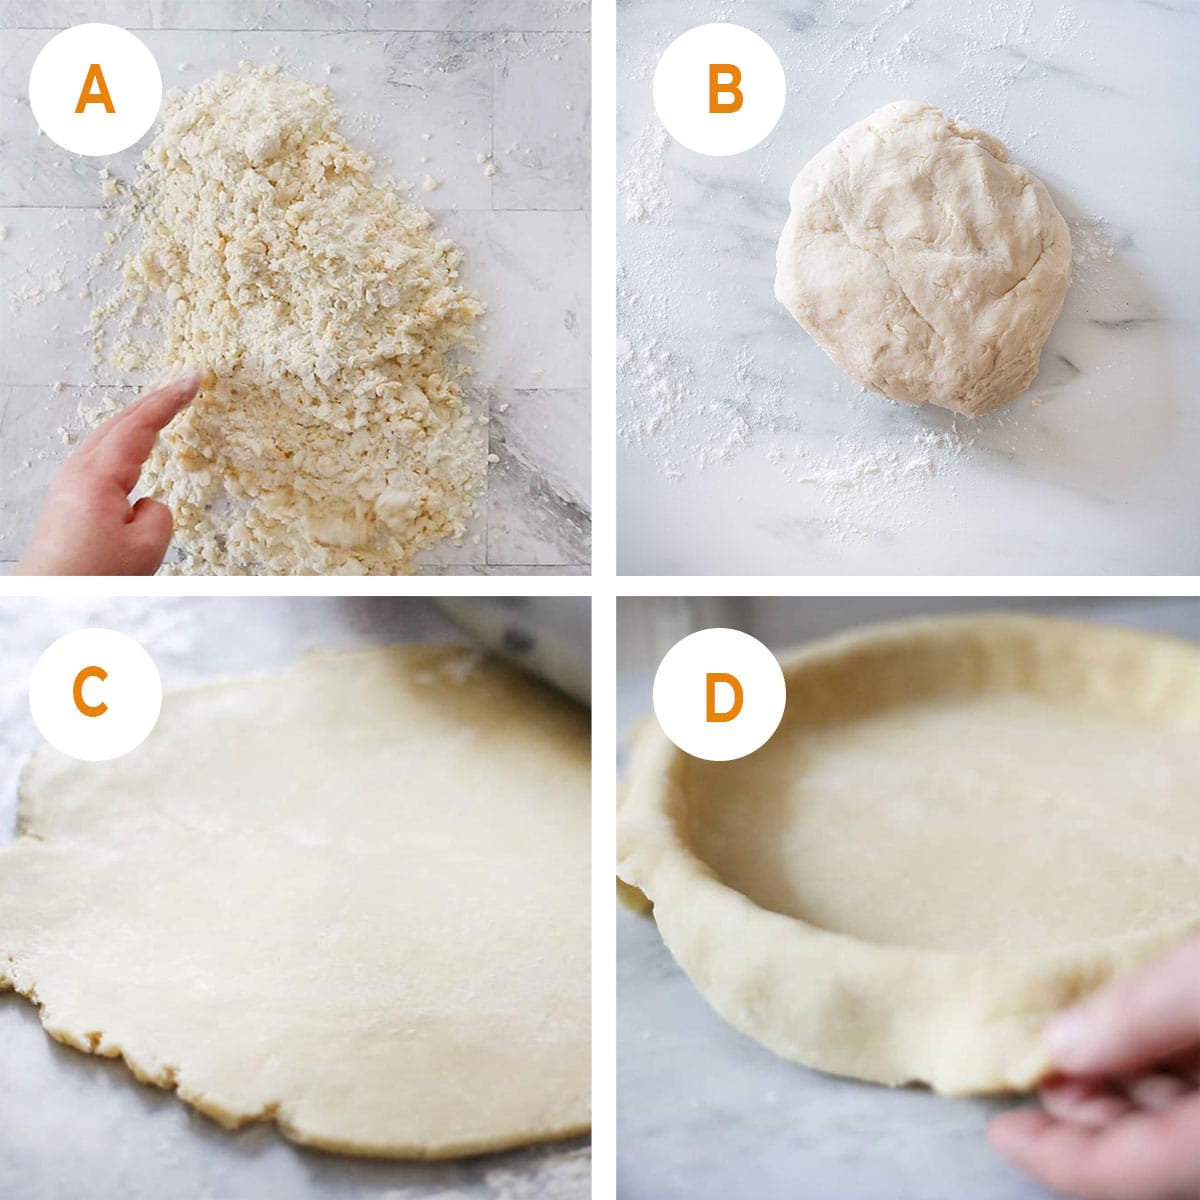 A collage with 4 steps showing how to prepare pay de calabaza dough.